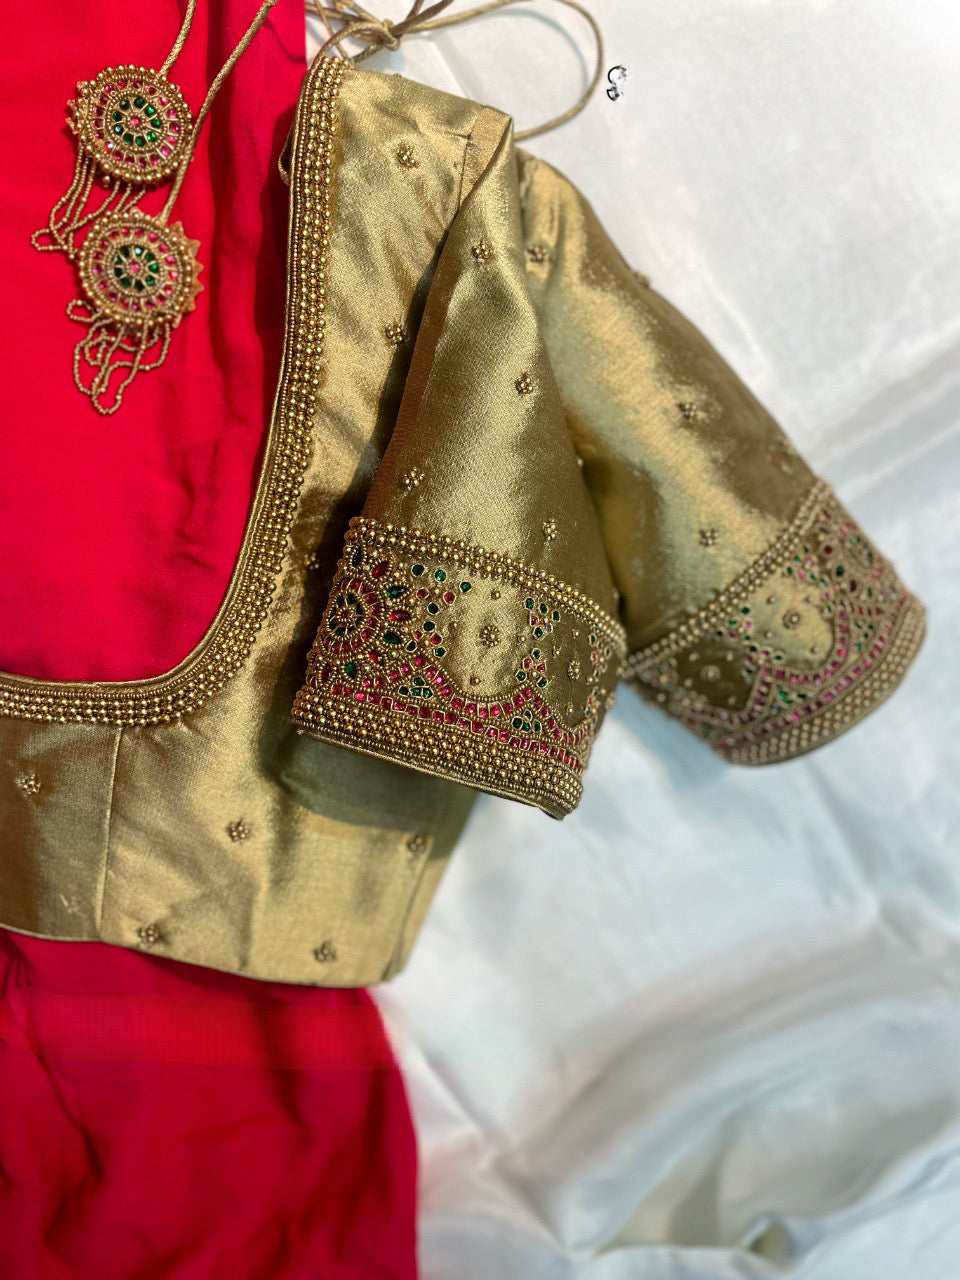 Maggam Work Blouse Designs- Find Marriage Bridal Maggam Work Blouse Designs  @WeddingWire